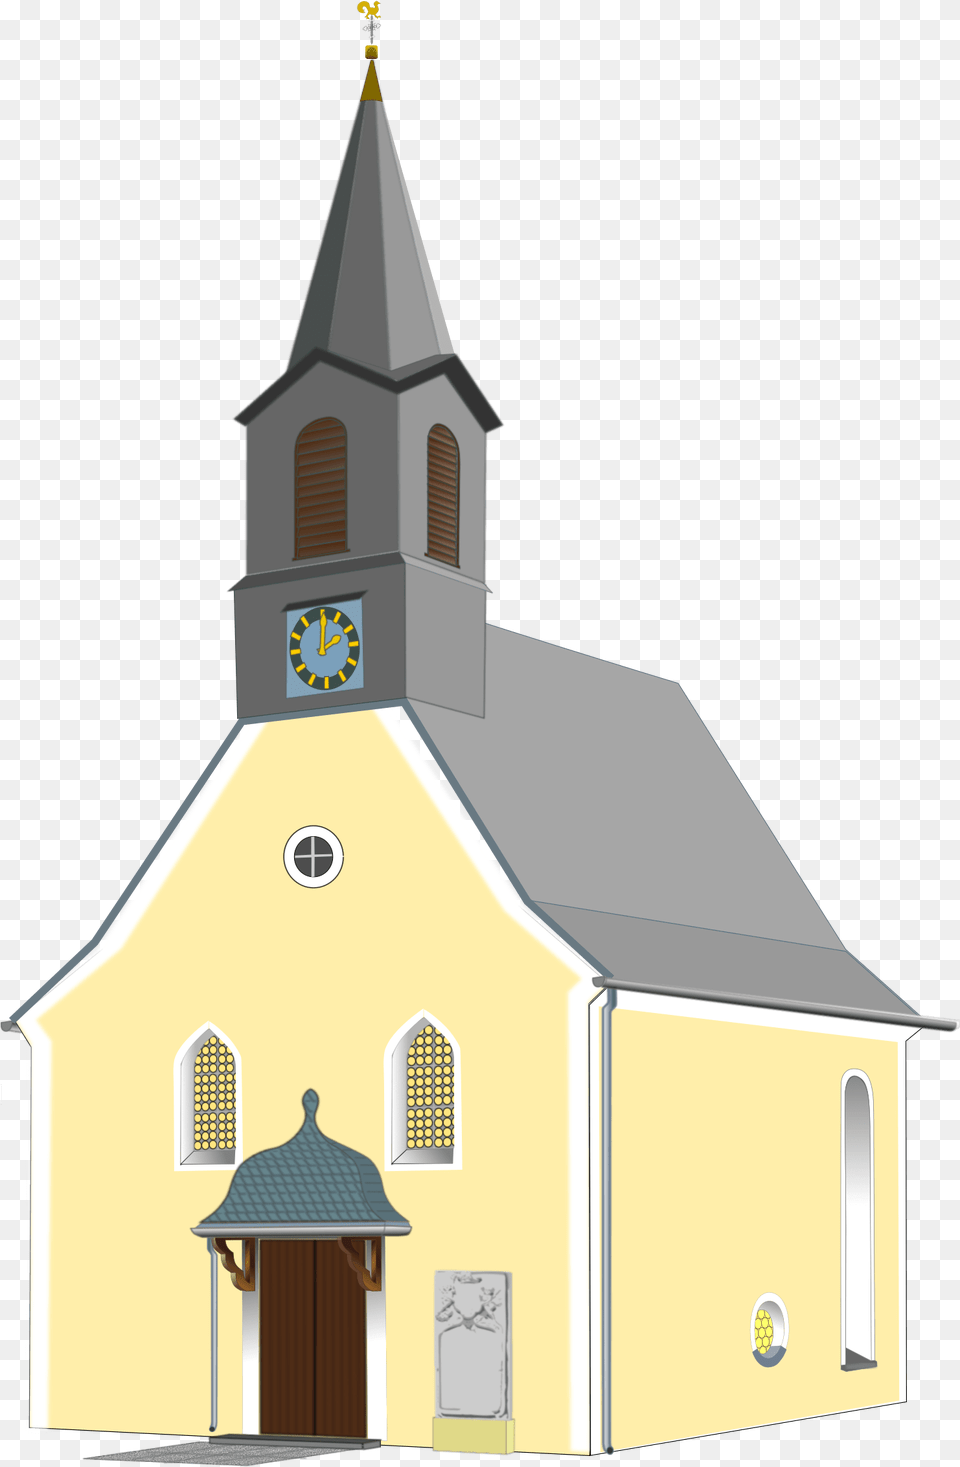 Transparent Building Church Transparent Background Church Transparent, Architecture, Clock Tower, Tower, Spire Free Png